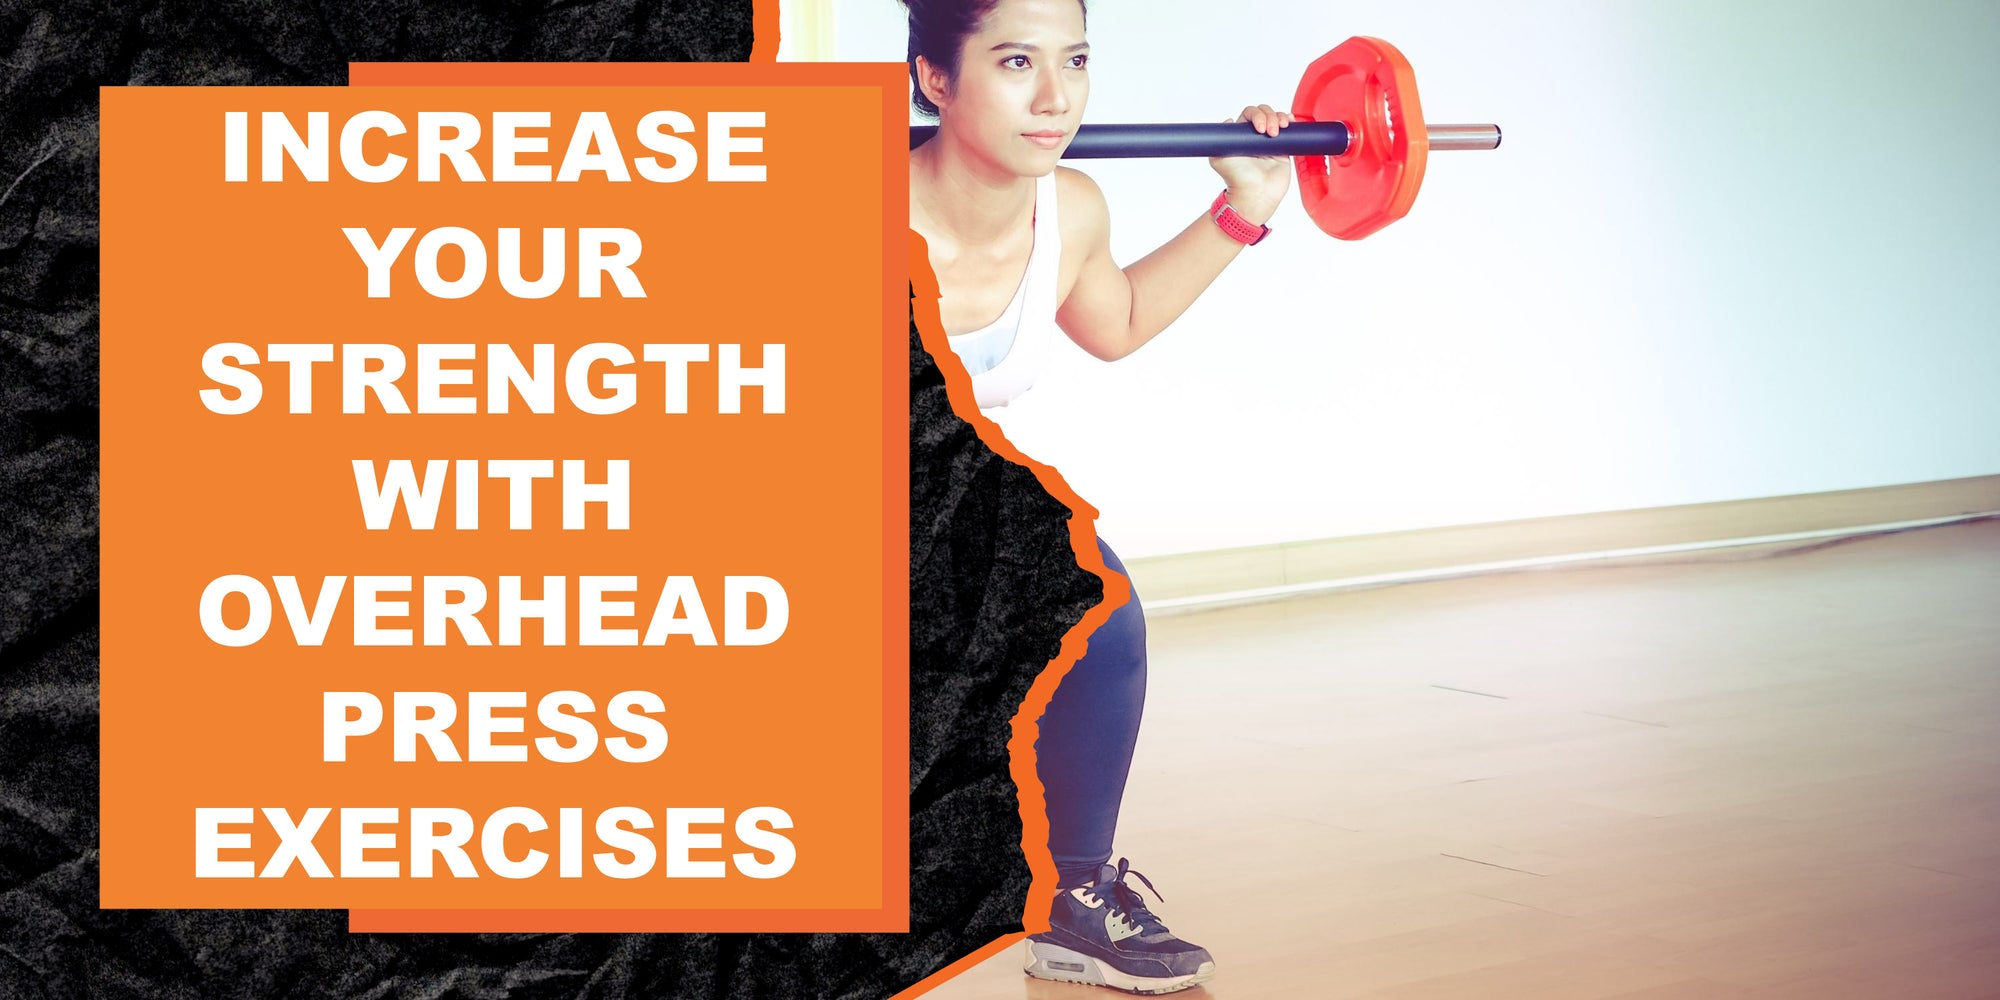 How to Increase Your Strength with Overhead Press Exercises